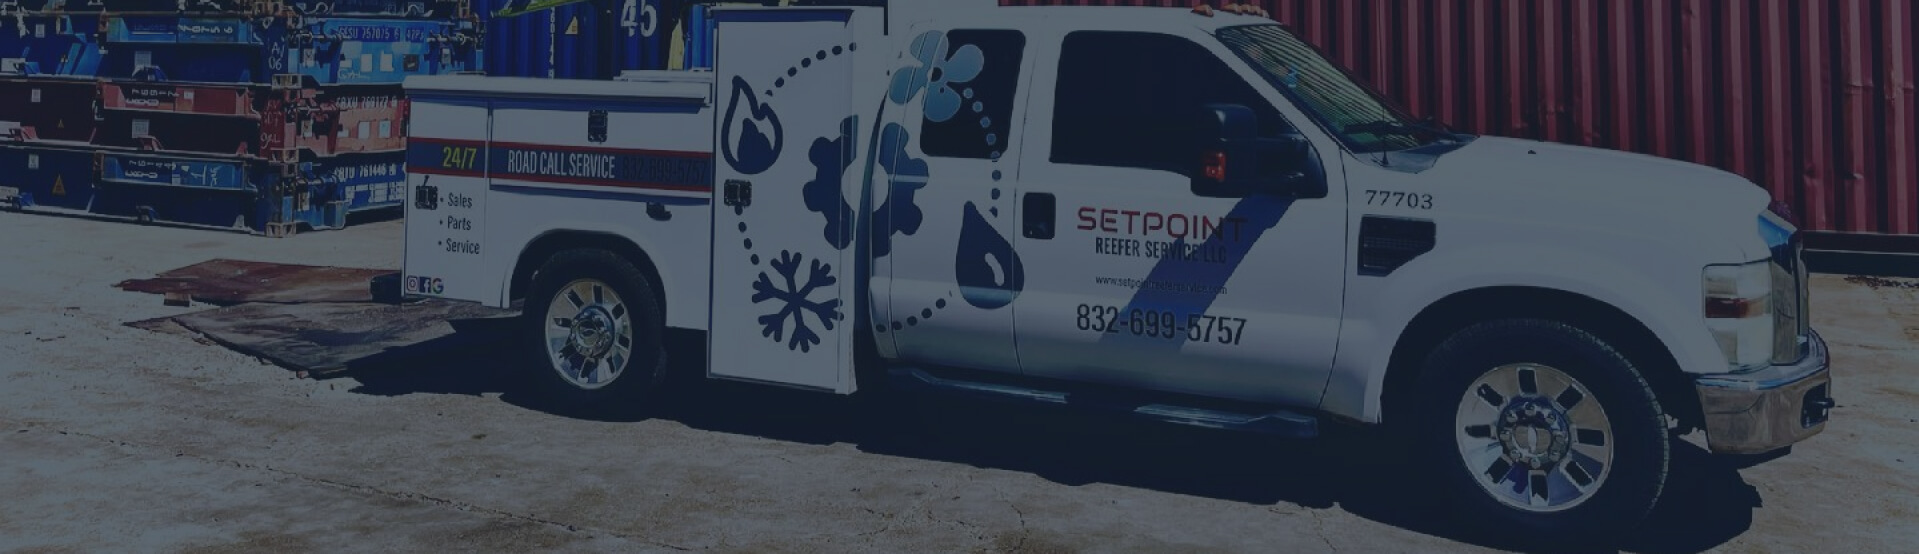 setpoint equipped truck from side view